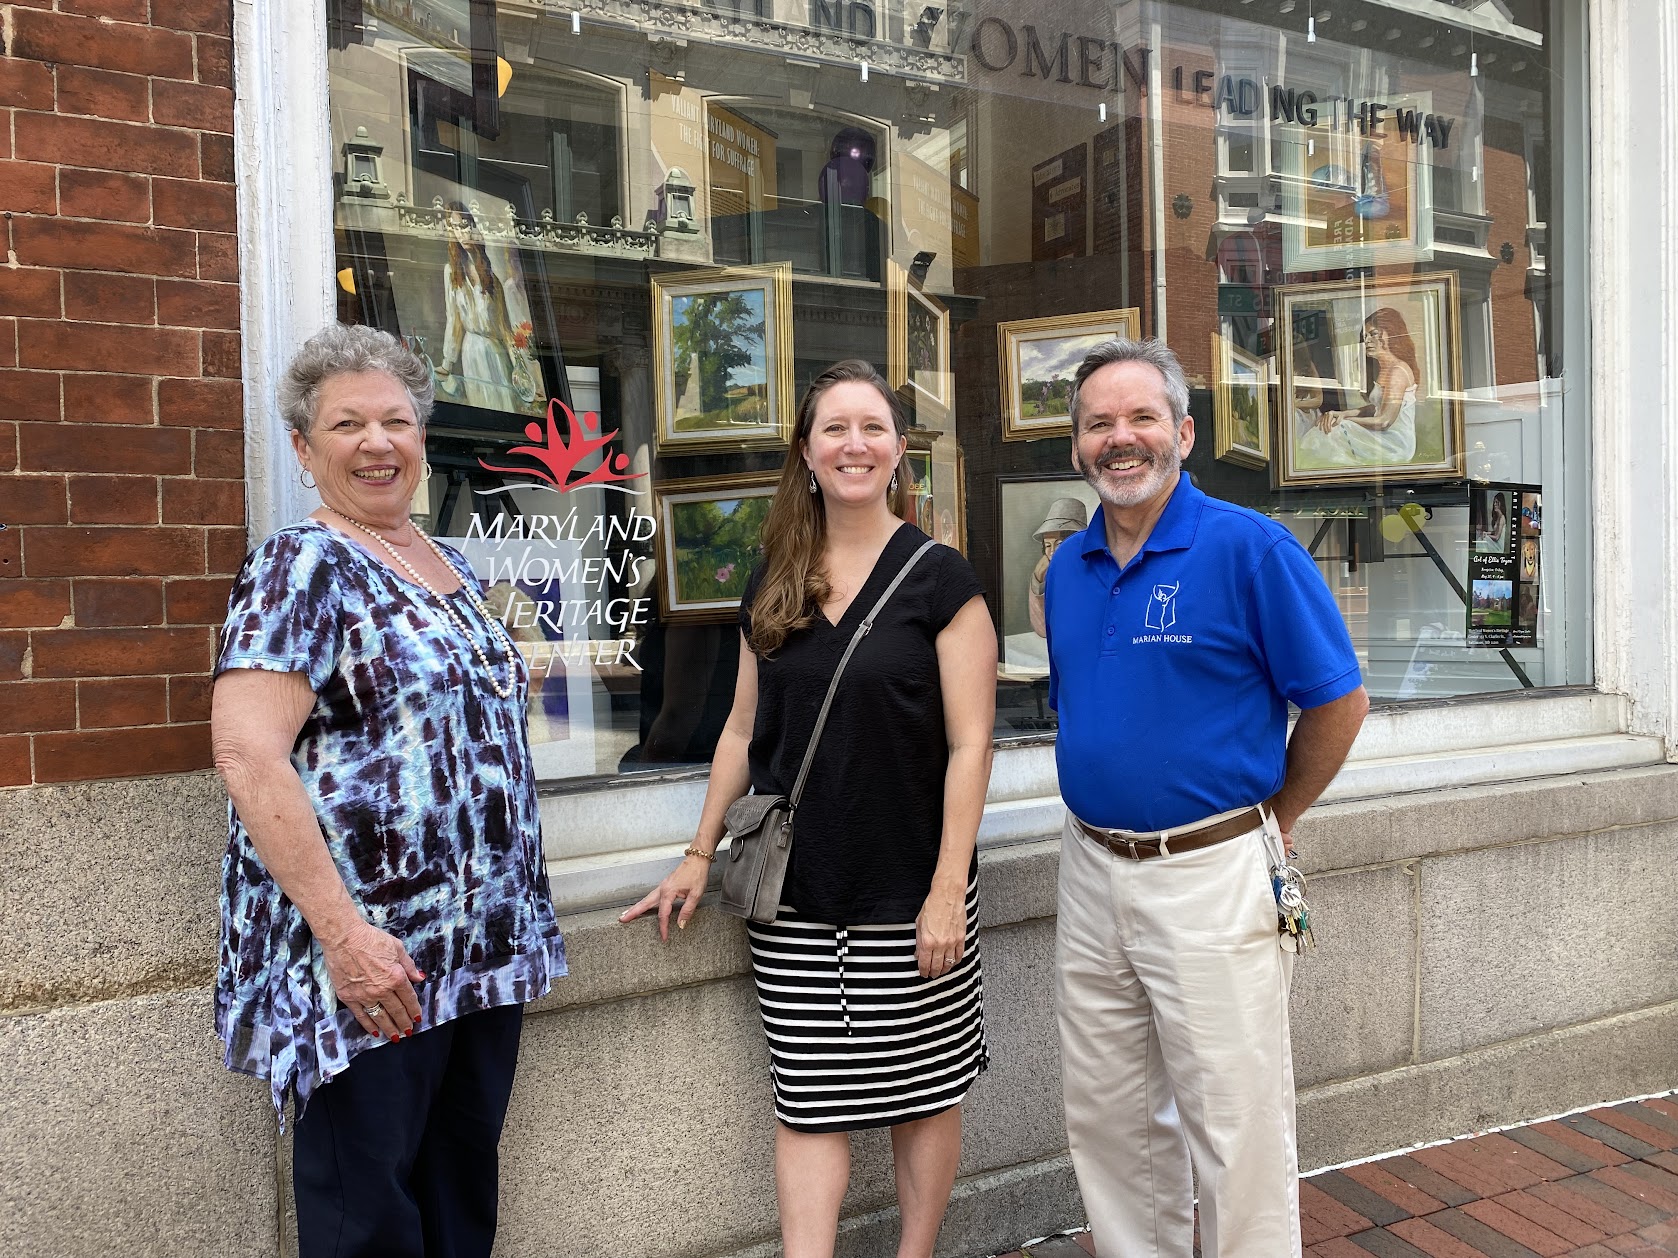 (l to r) MWHC Executive Director Diana M. Bailey with Katie Allston (Marian House Executive Director) and Peter McIver (Marian House Director of Operations)